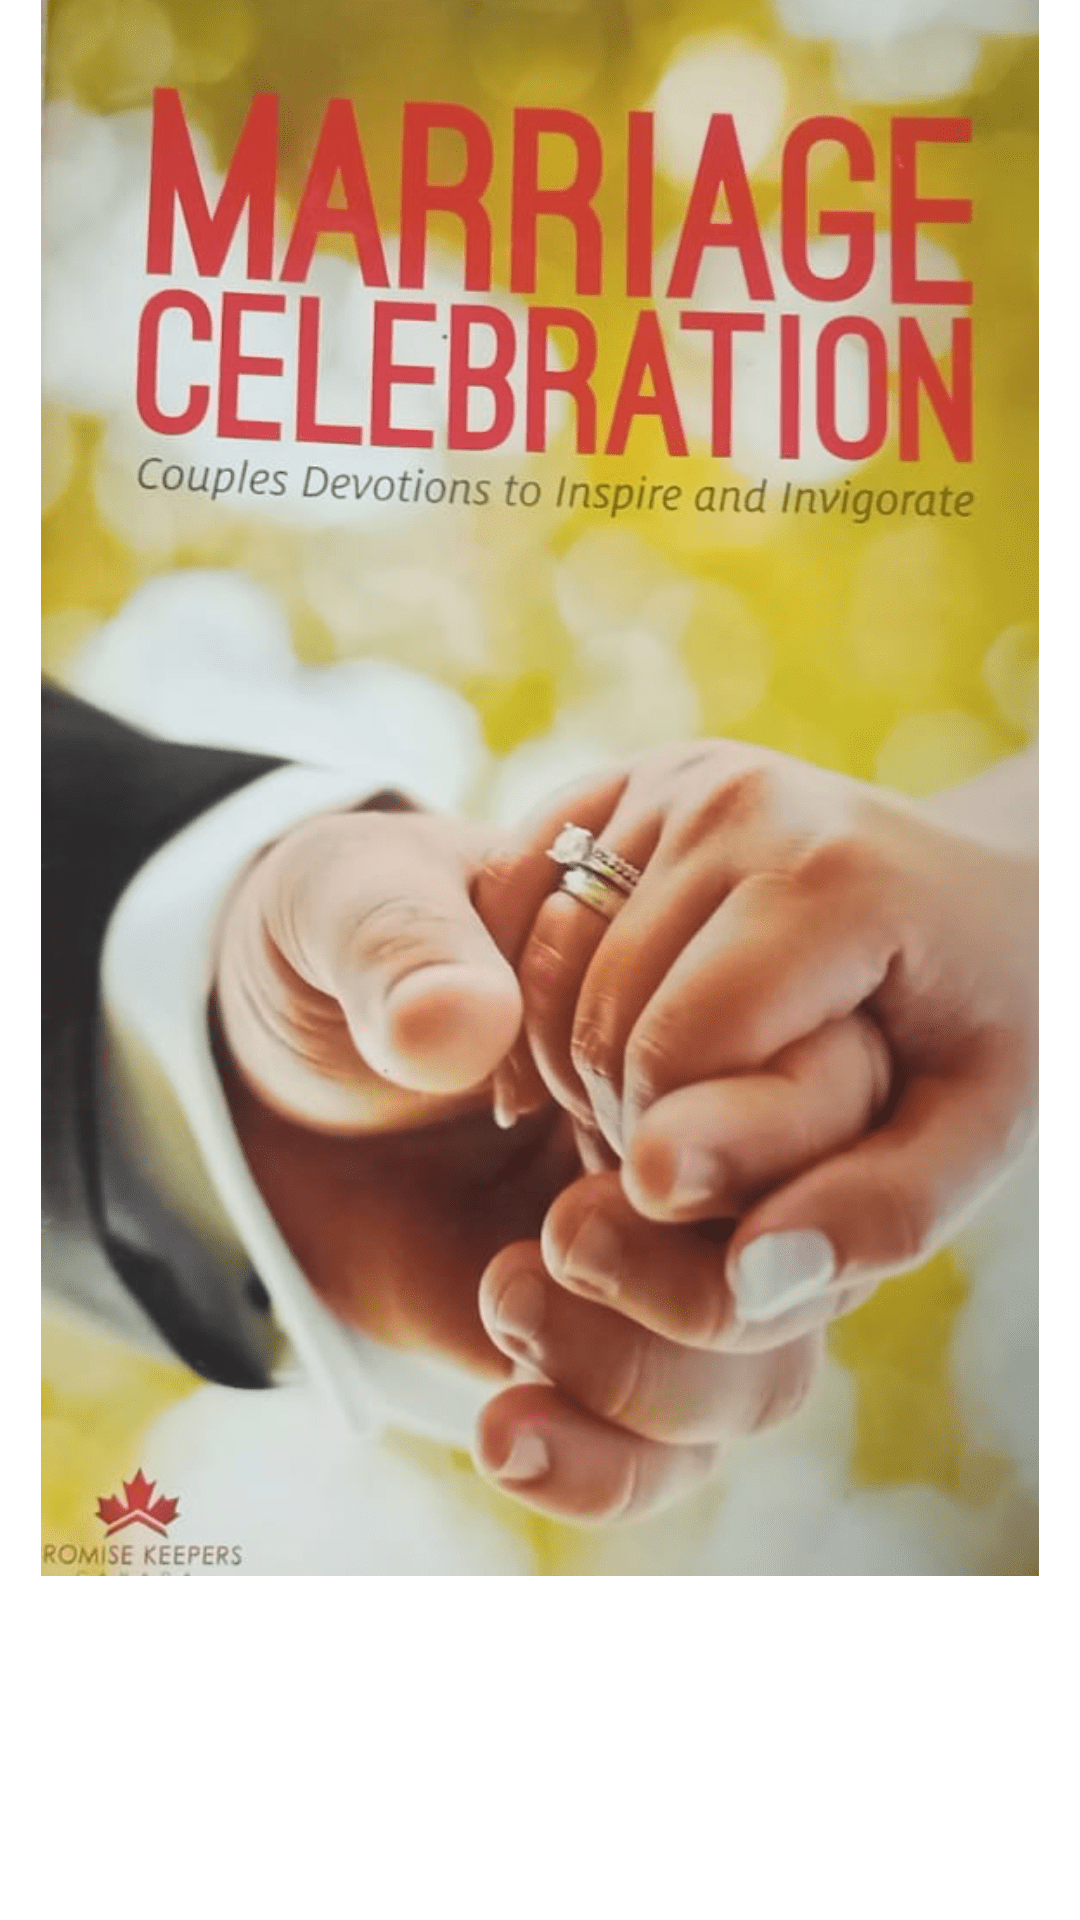 Marriage Celebration: Couples Devotions to Inspire and Invigorate